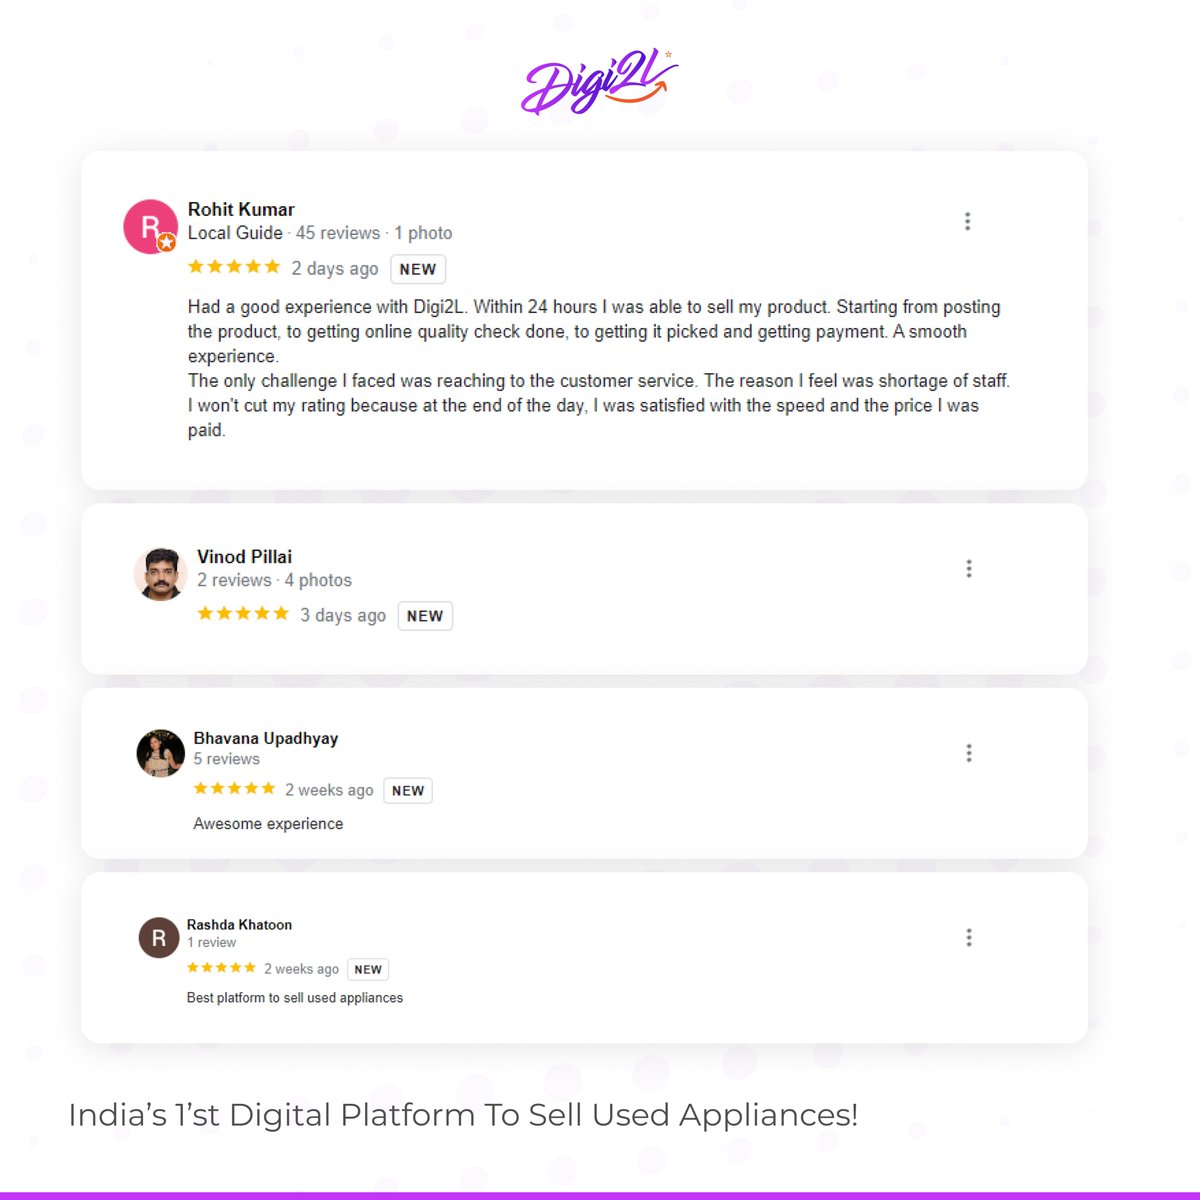 We are delighted to share the latest customer review that brought us joy!

#digi2l #easyselling #convenience #seemless #preused #preowned #preloved #sellhomeappliance #selloldtelevision #bestprice #freepickup #topbrands #trendingnow